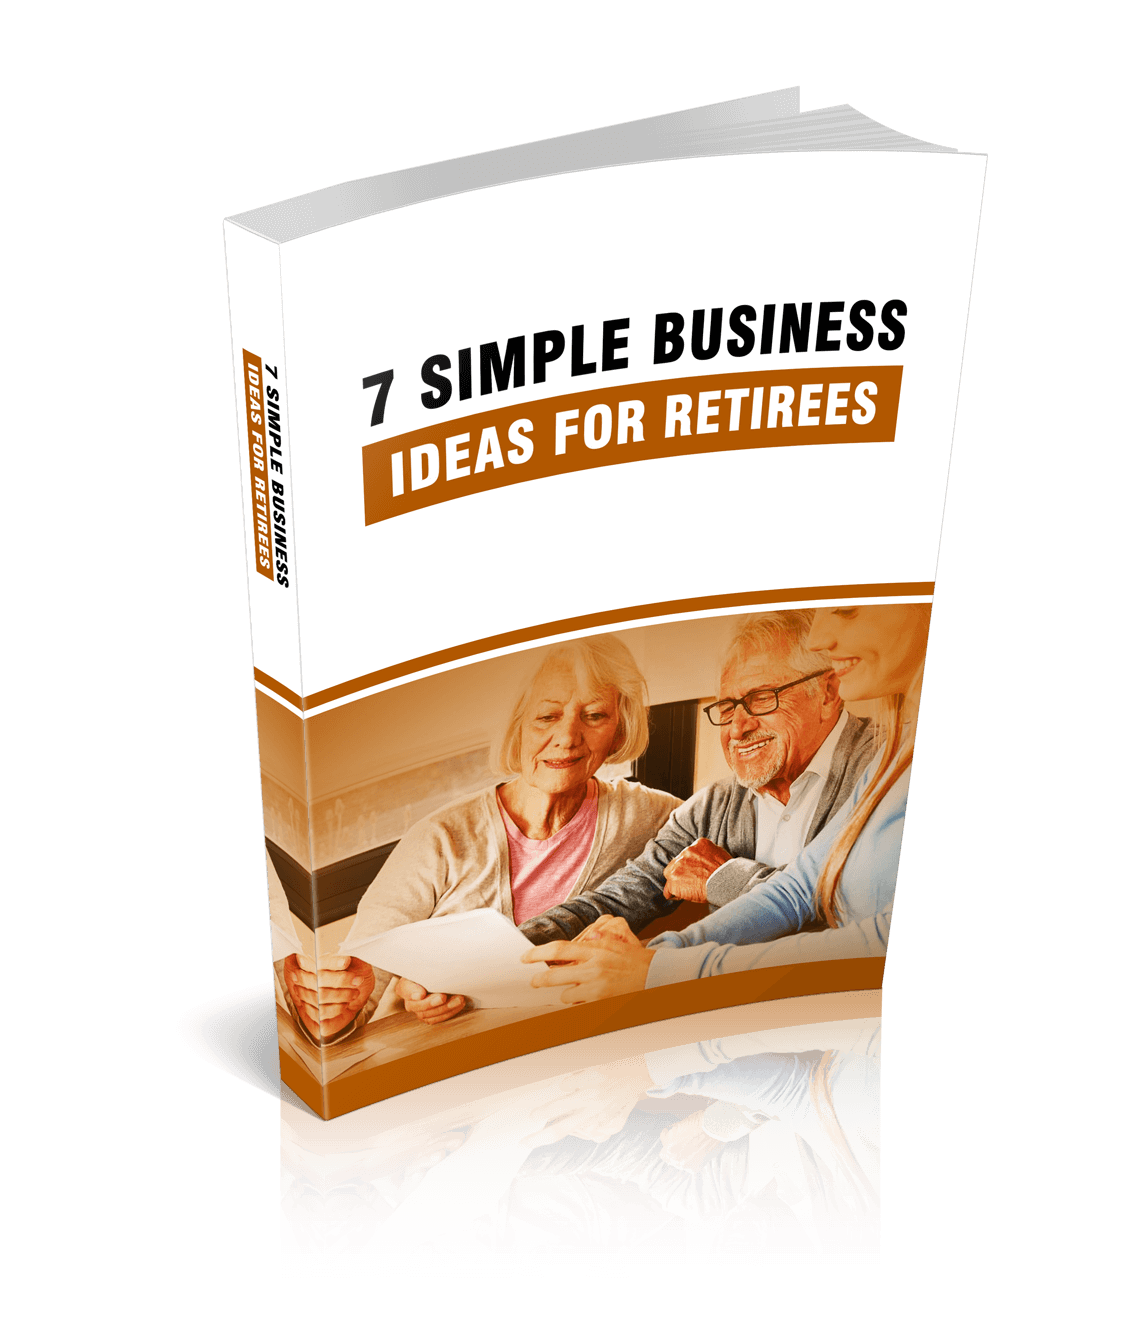 Limited PLR 7 Simple Business Ideas Review